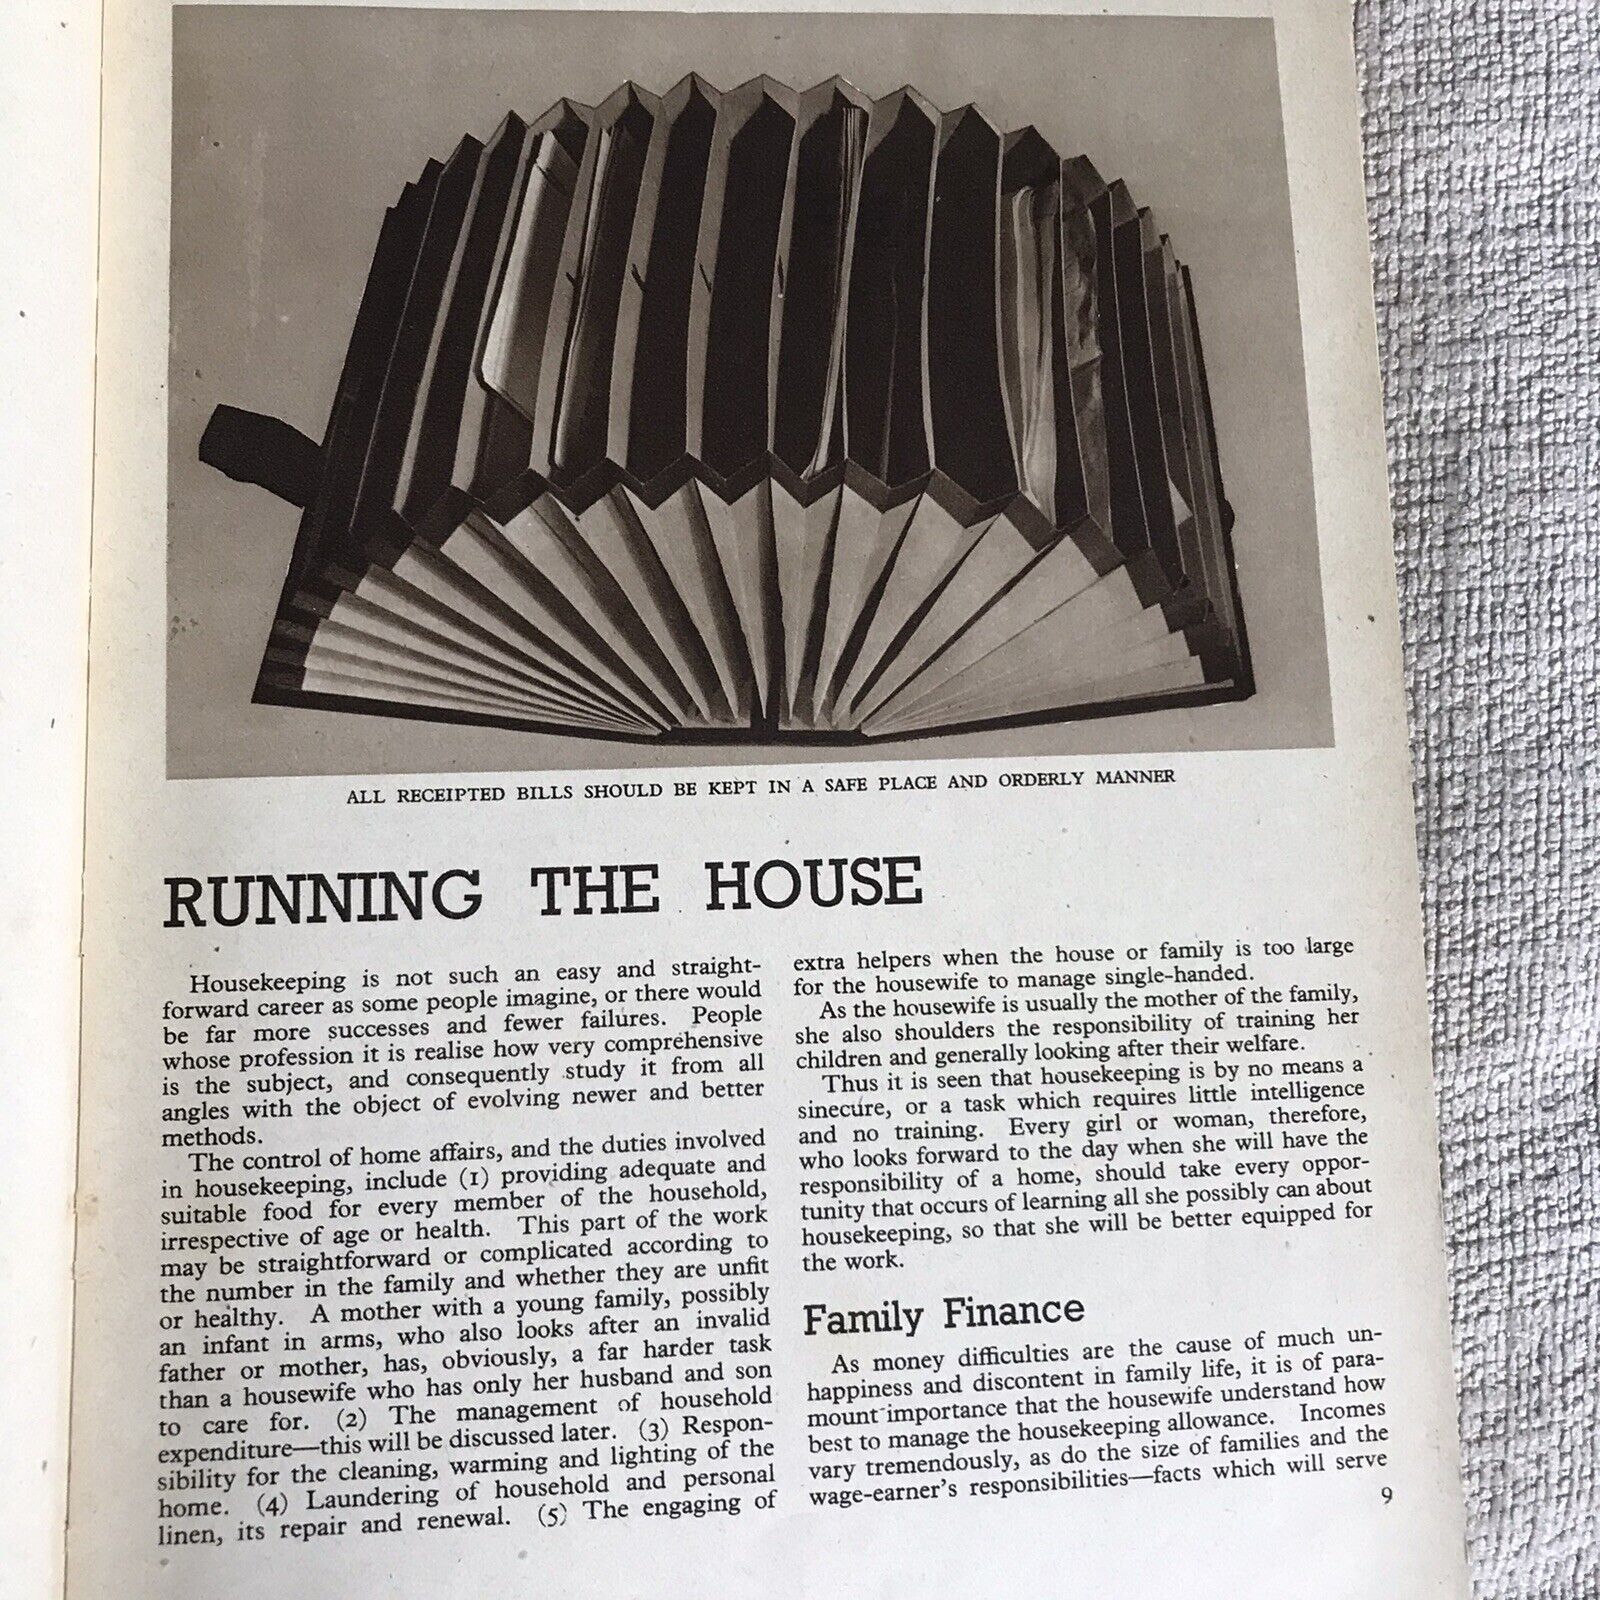 1937*1st* The Housewife’s Book(324 Illust) Daily Express Publication Honeyburn Books (UK)